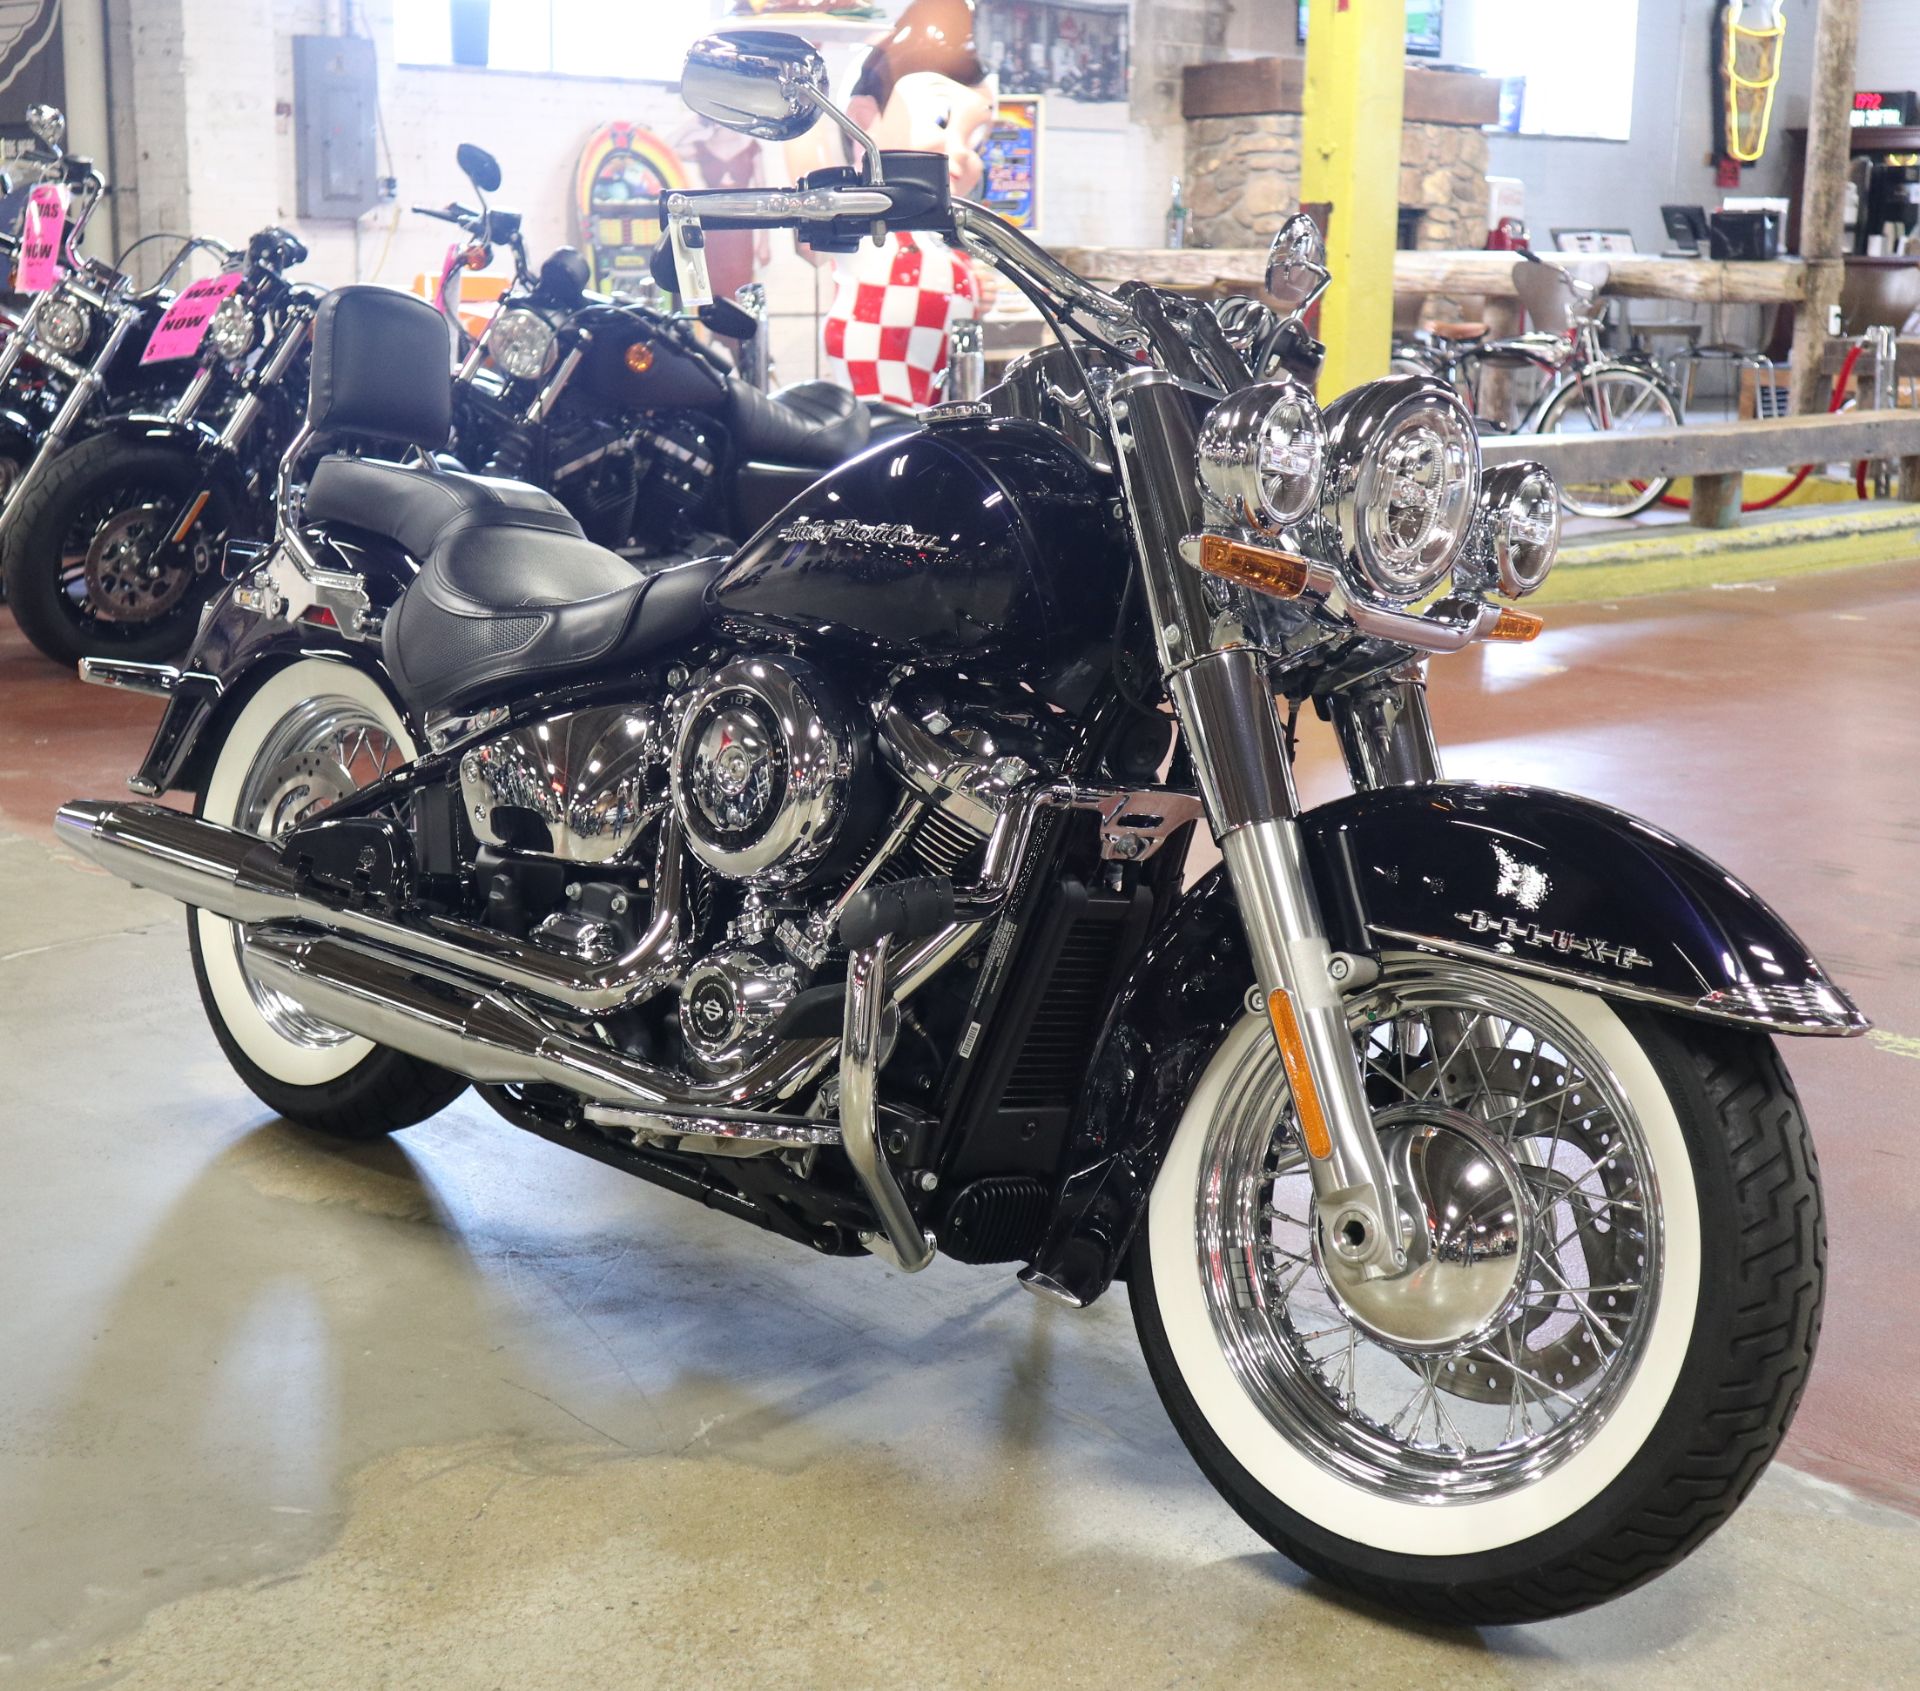 2020 Harley-Davidson Deluxe in New London, Connecticut - Photo 2